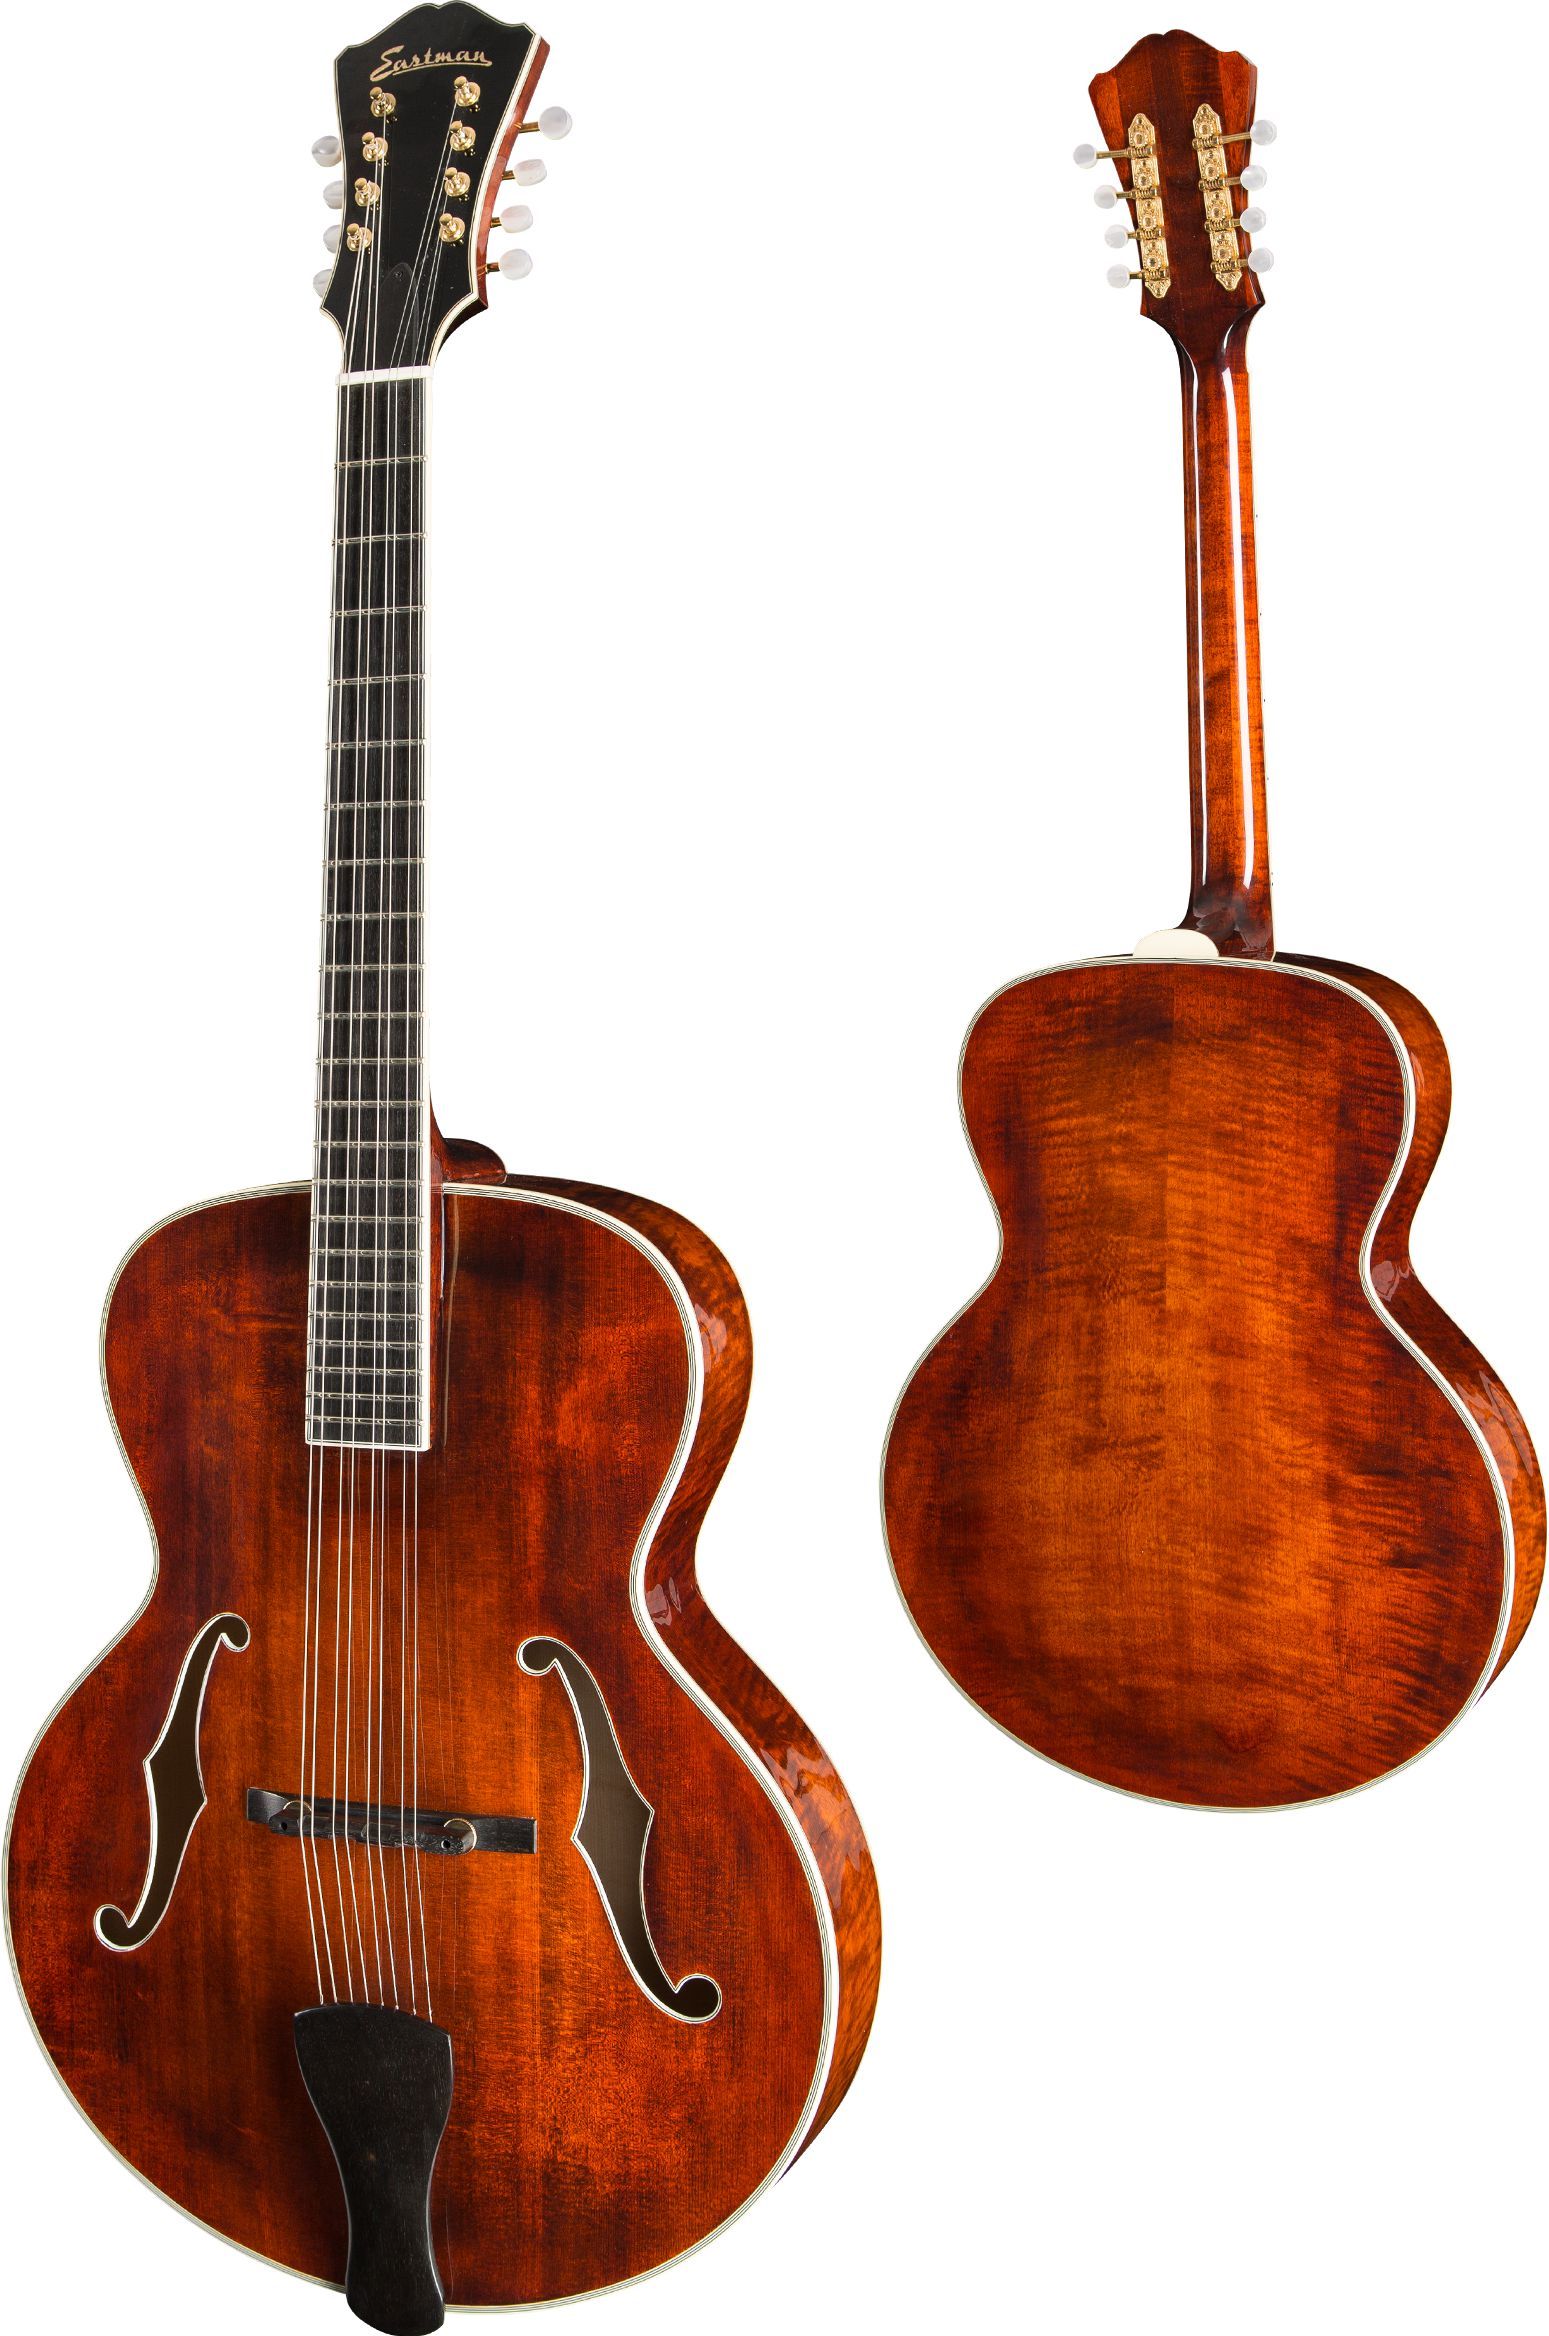 Eastman MDC805 A-style Mandcello Mandolin (Solid Spruce top, Solid AAA Maple back & Sides, w/Case), Mandolin for sale at Richards Guitars.